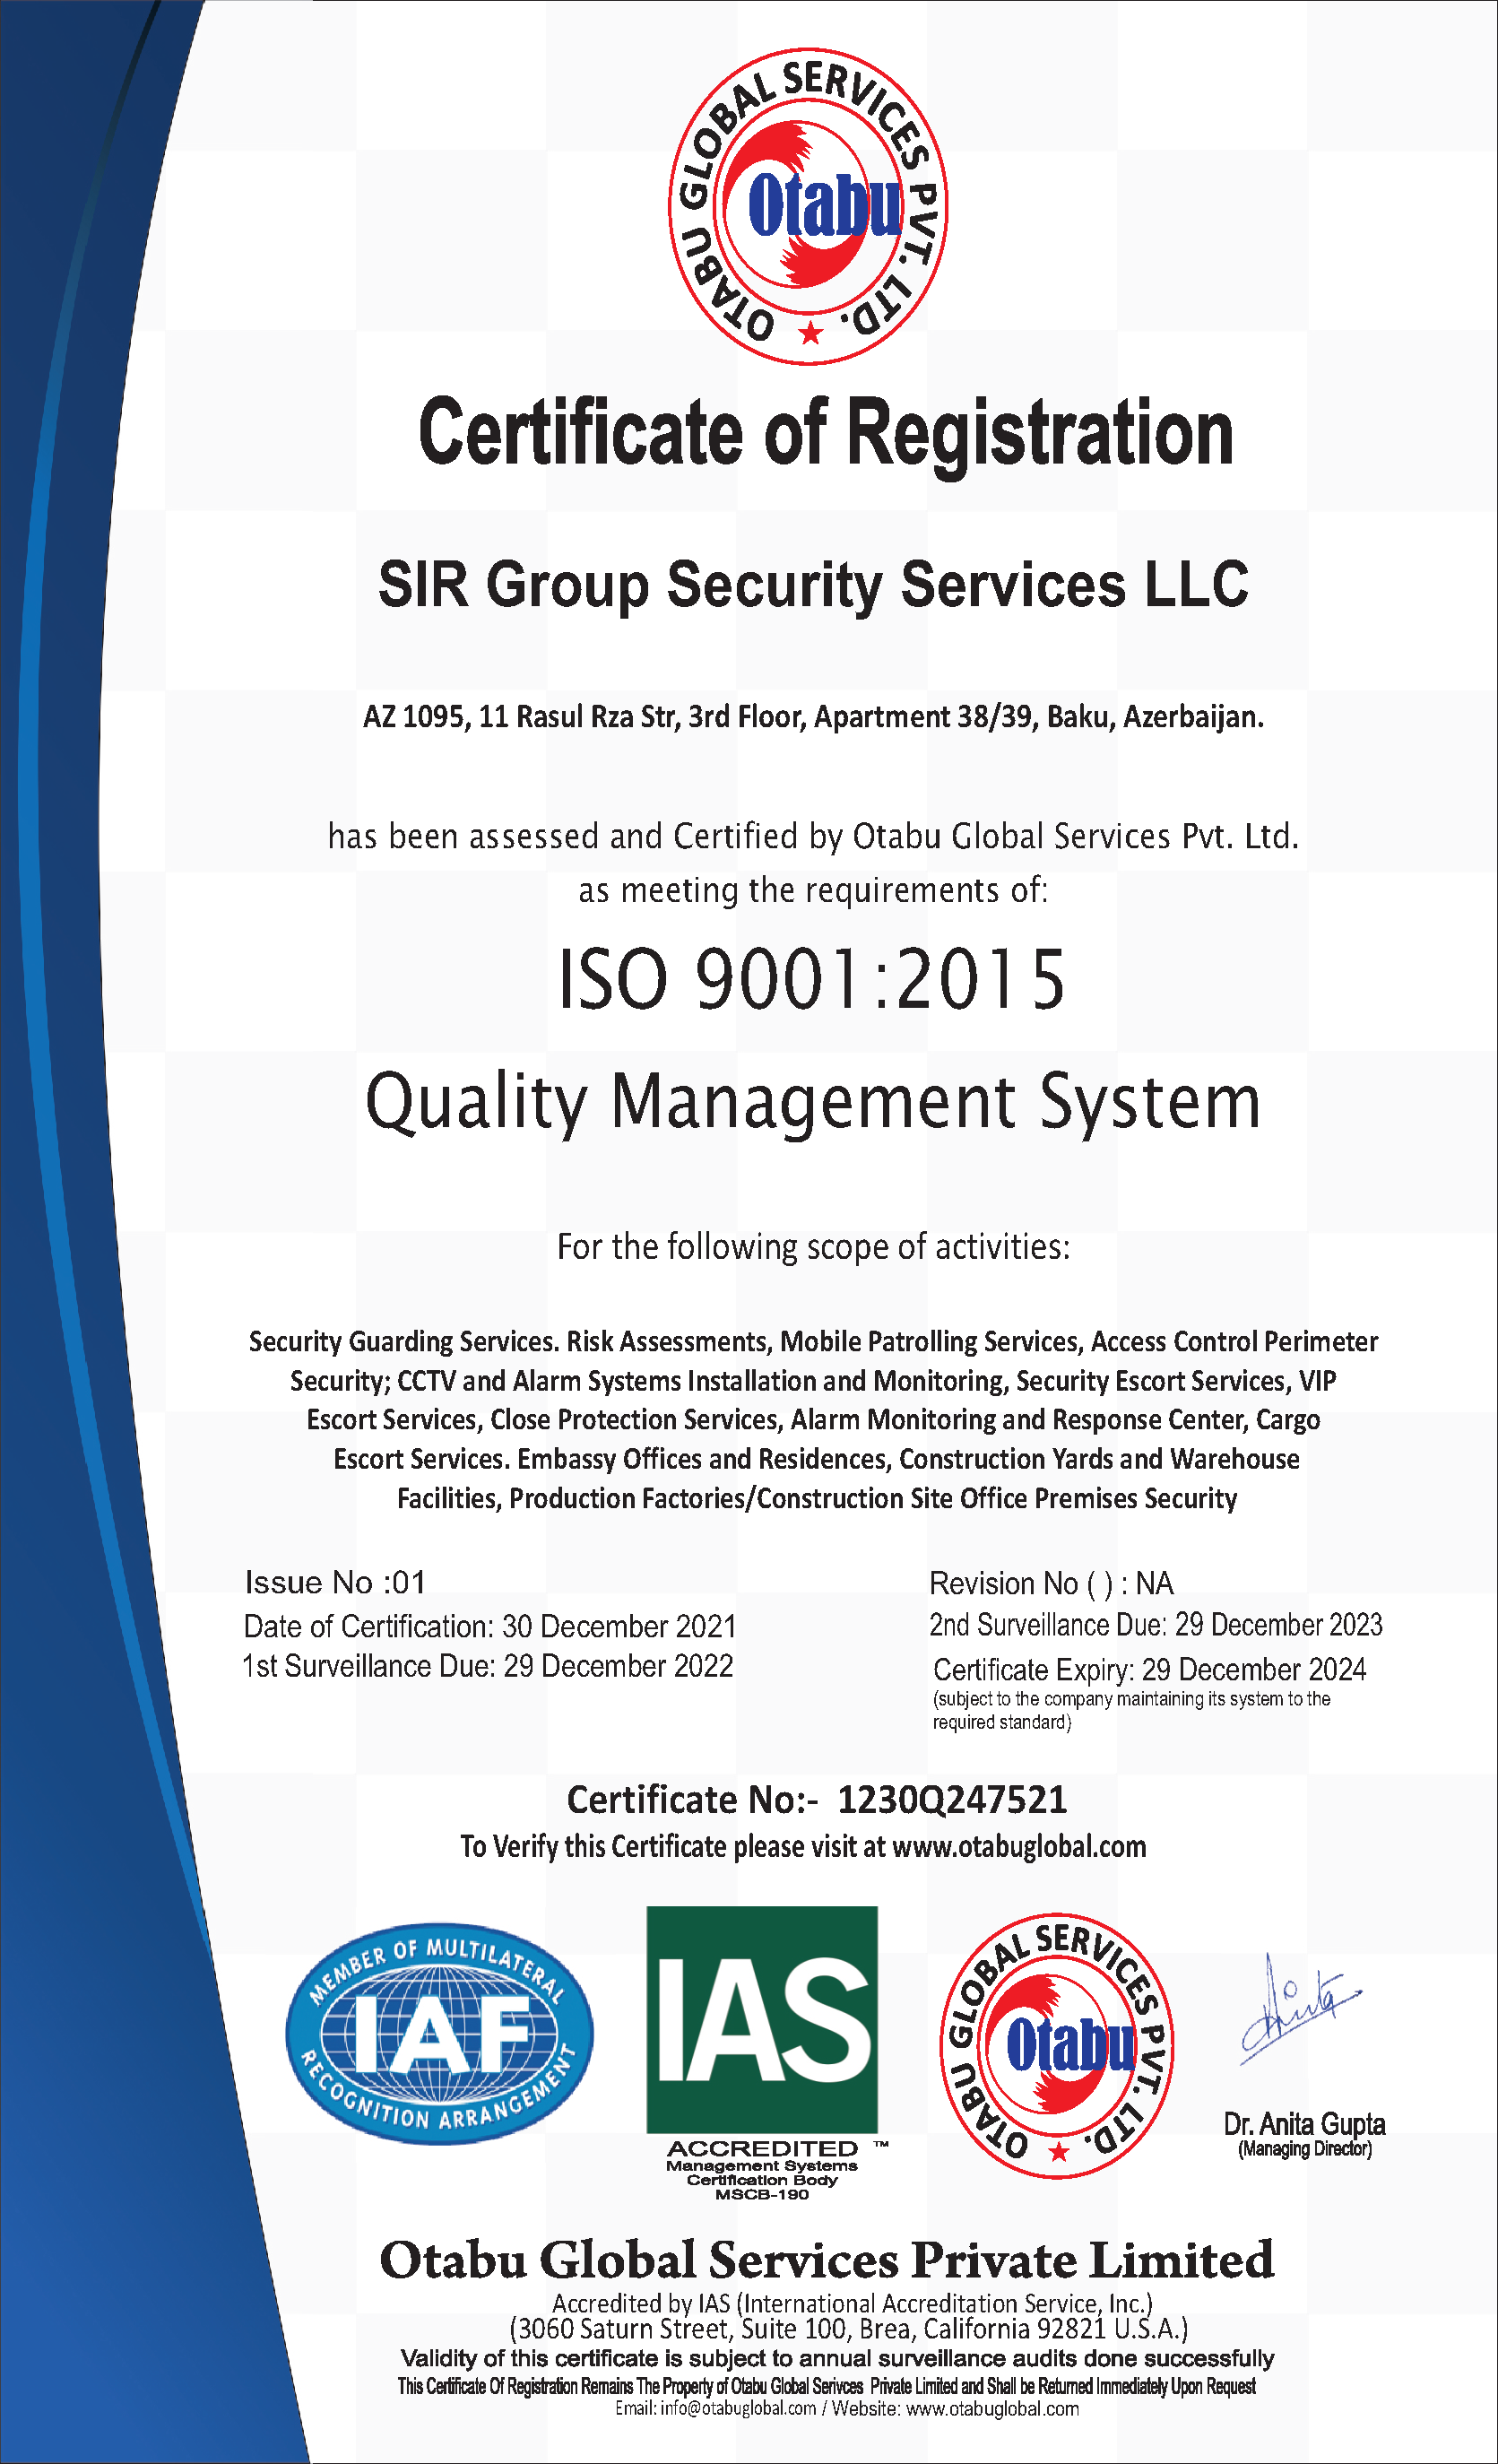 SIR-GSS-ISO-9001-2015-Certificate.png